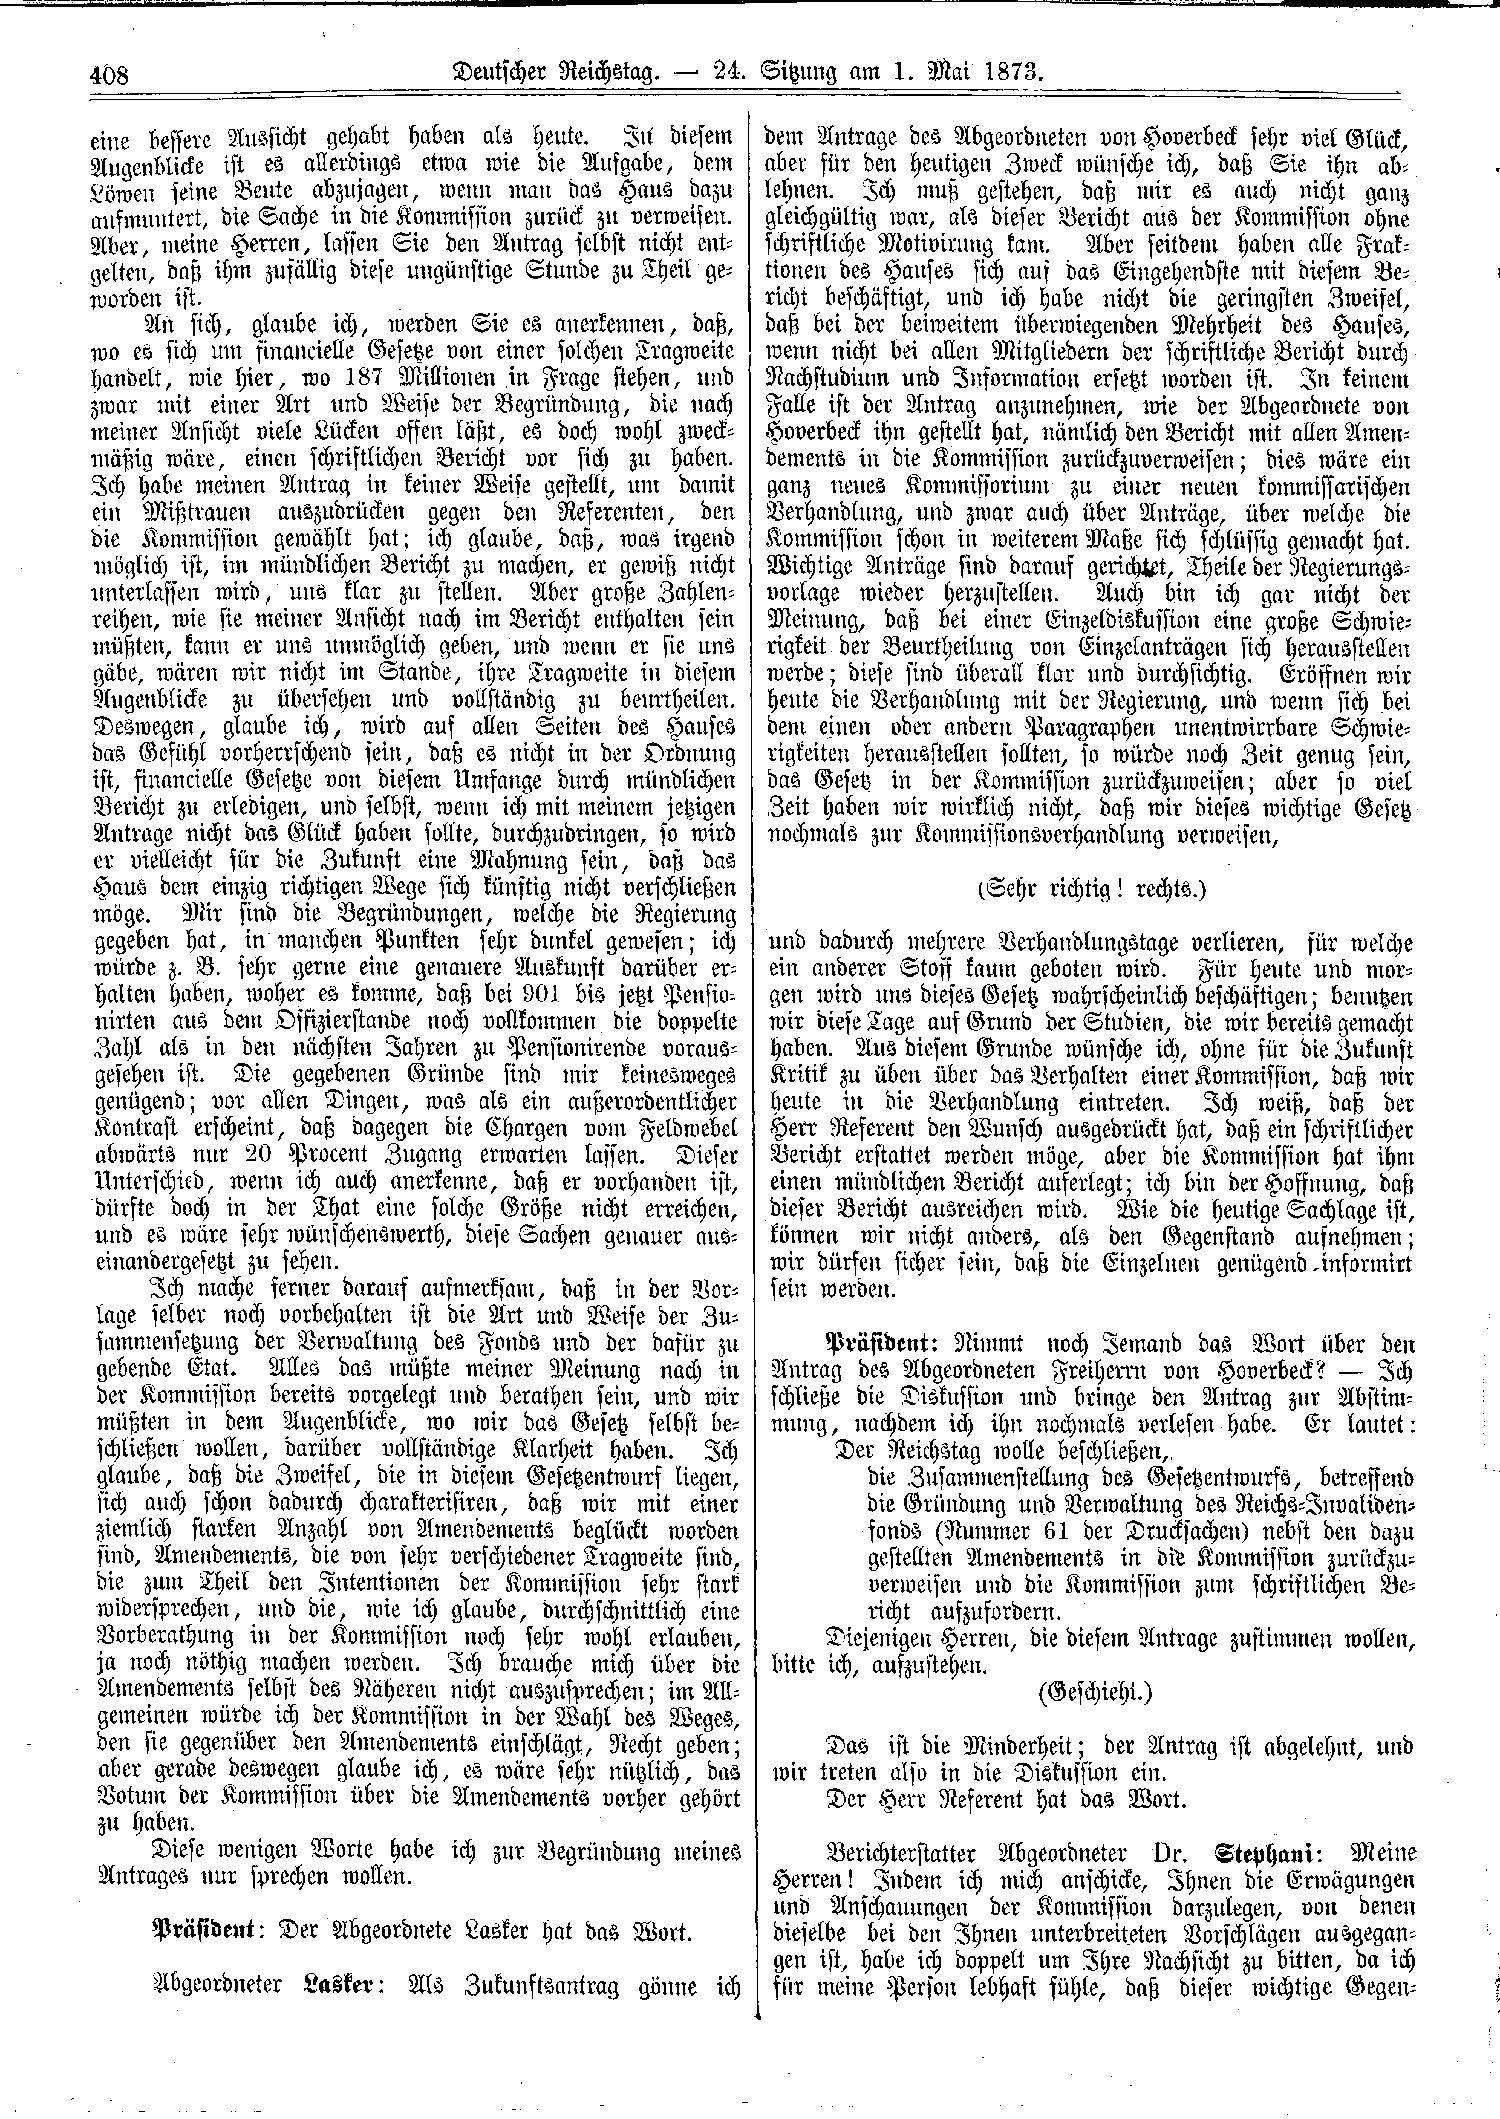 Scan of page 408